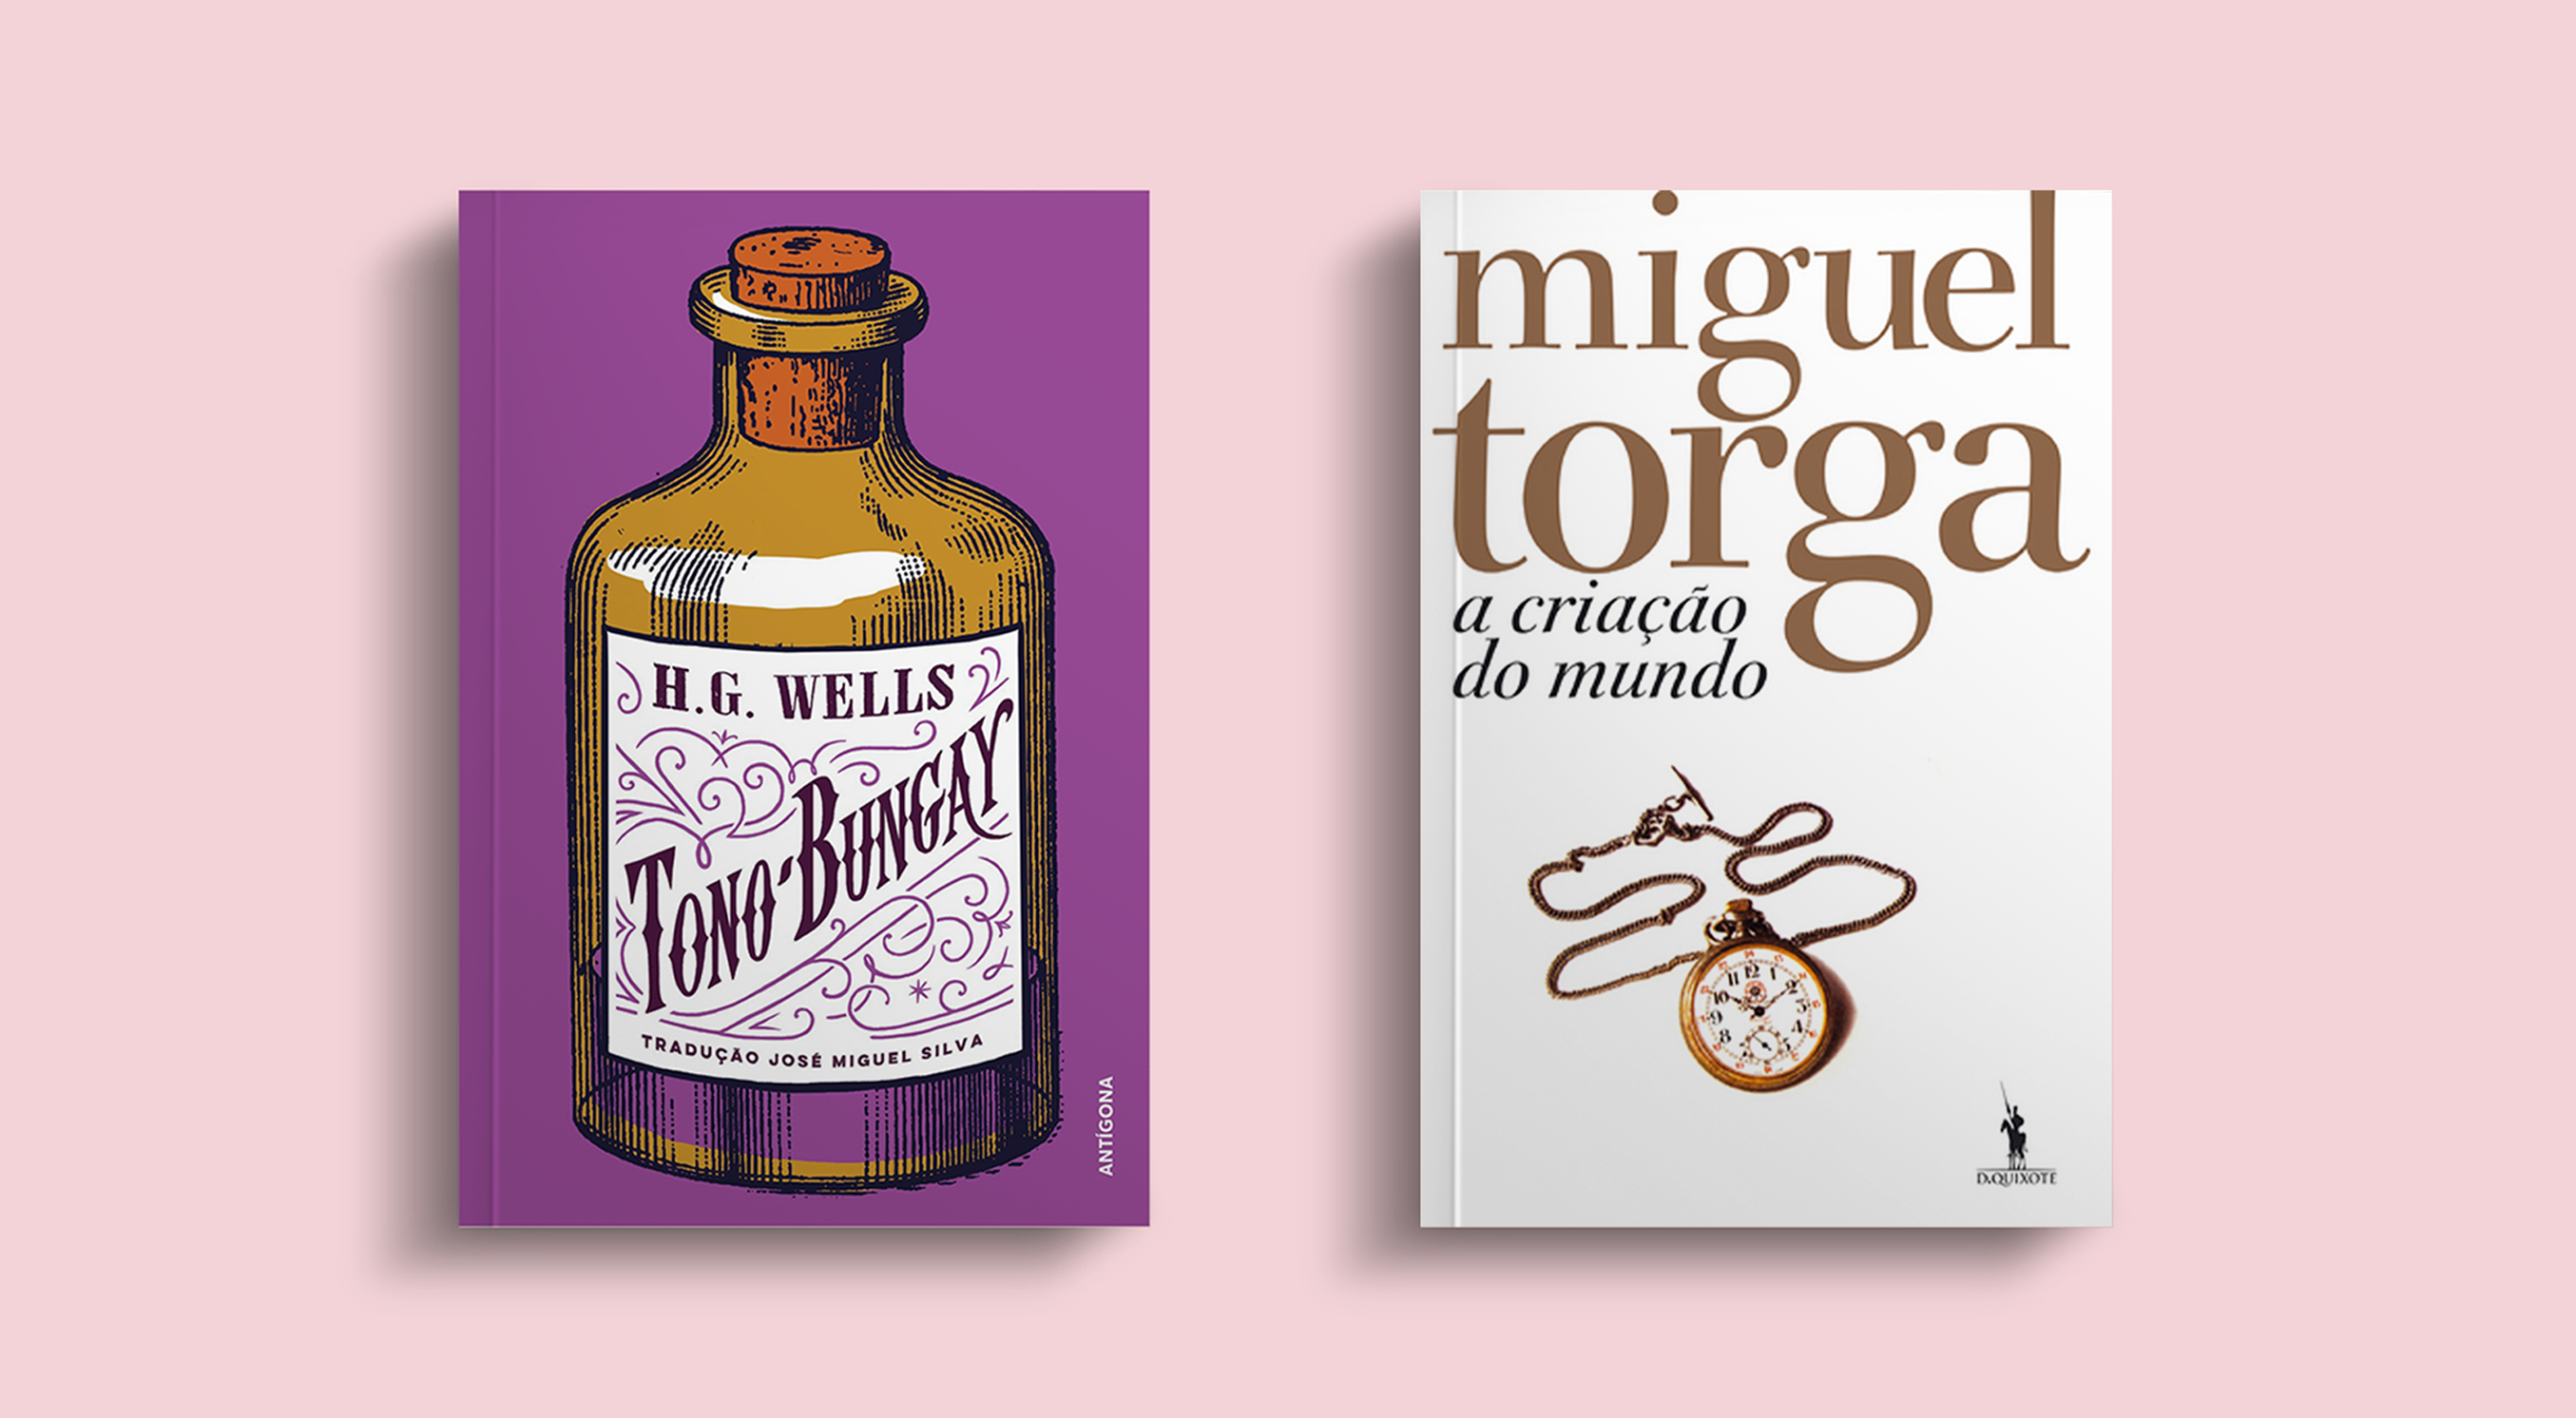 "A Criação do Mundo", by Miguel Torga and "Tono-Bungay", by H. G. Wells are the suggestions of Livraria Lello booksellers for this month